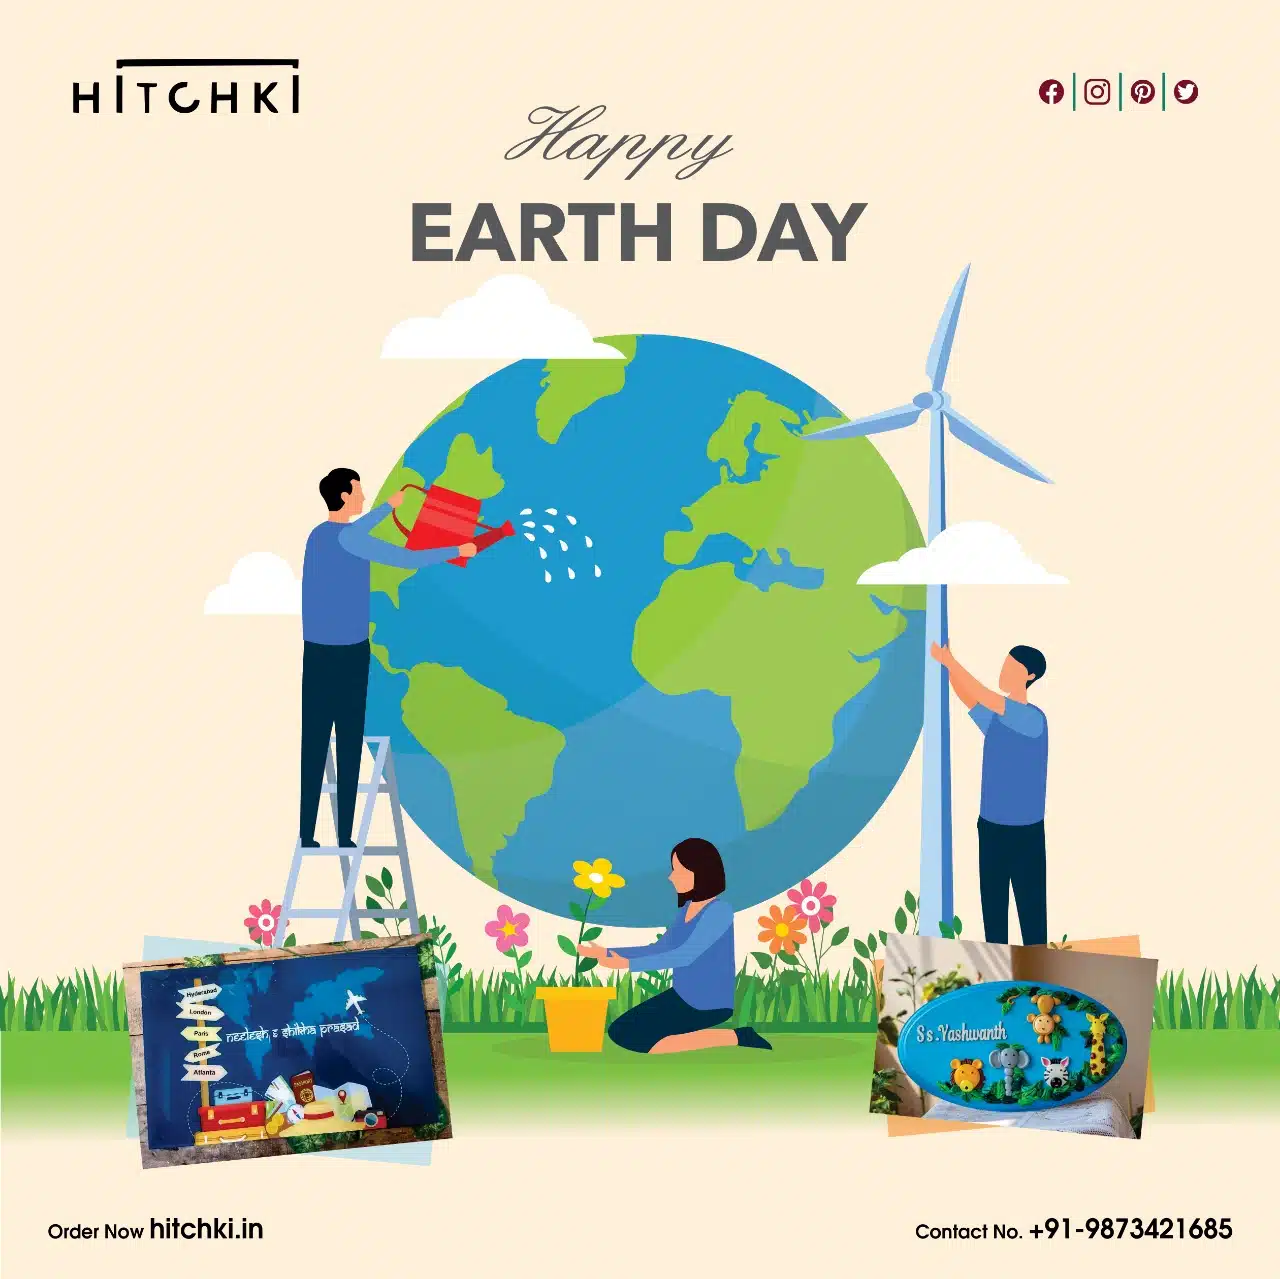 Wishing You All A Very Happy Earth Day